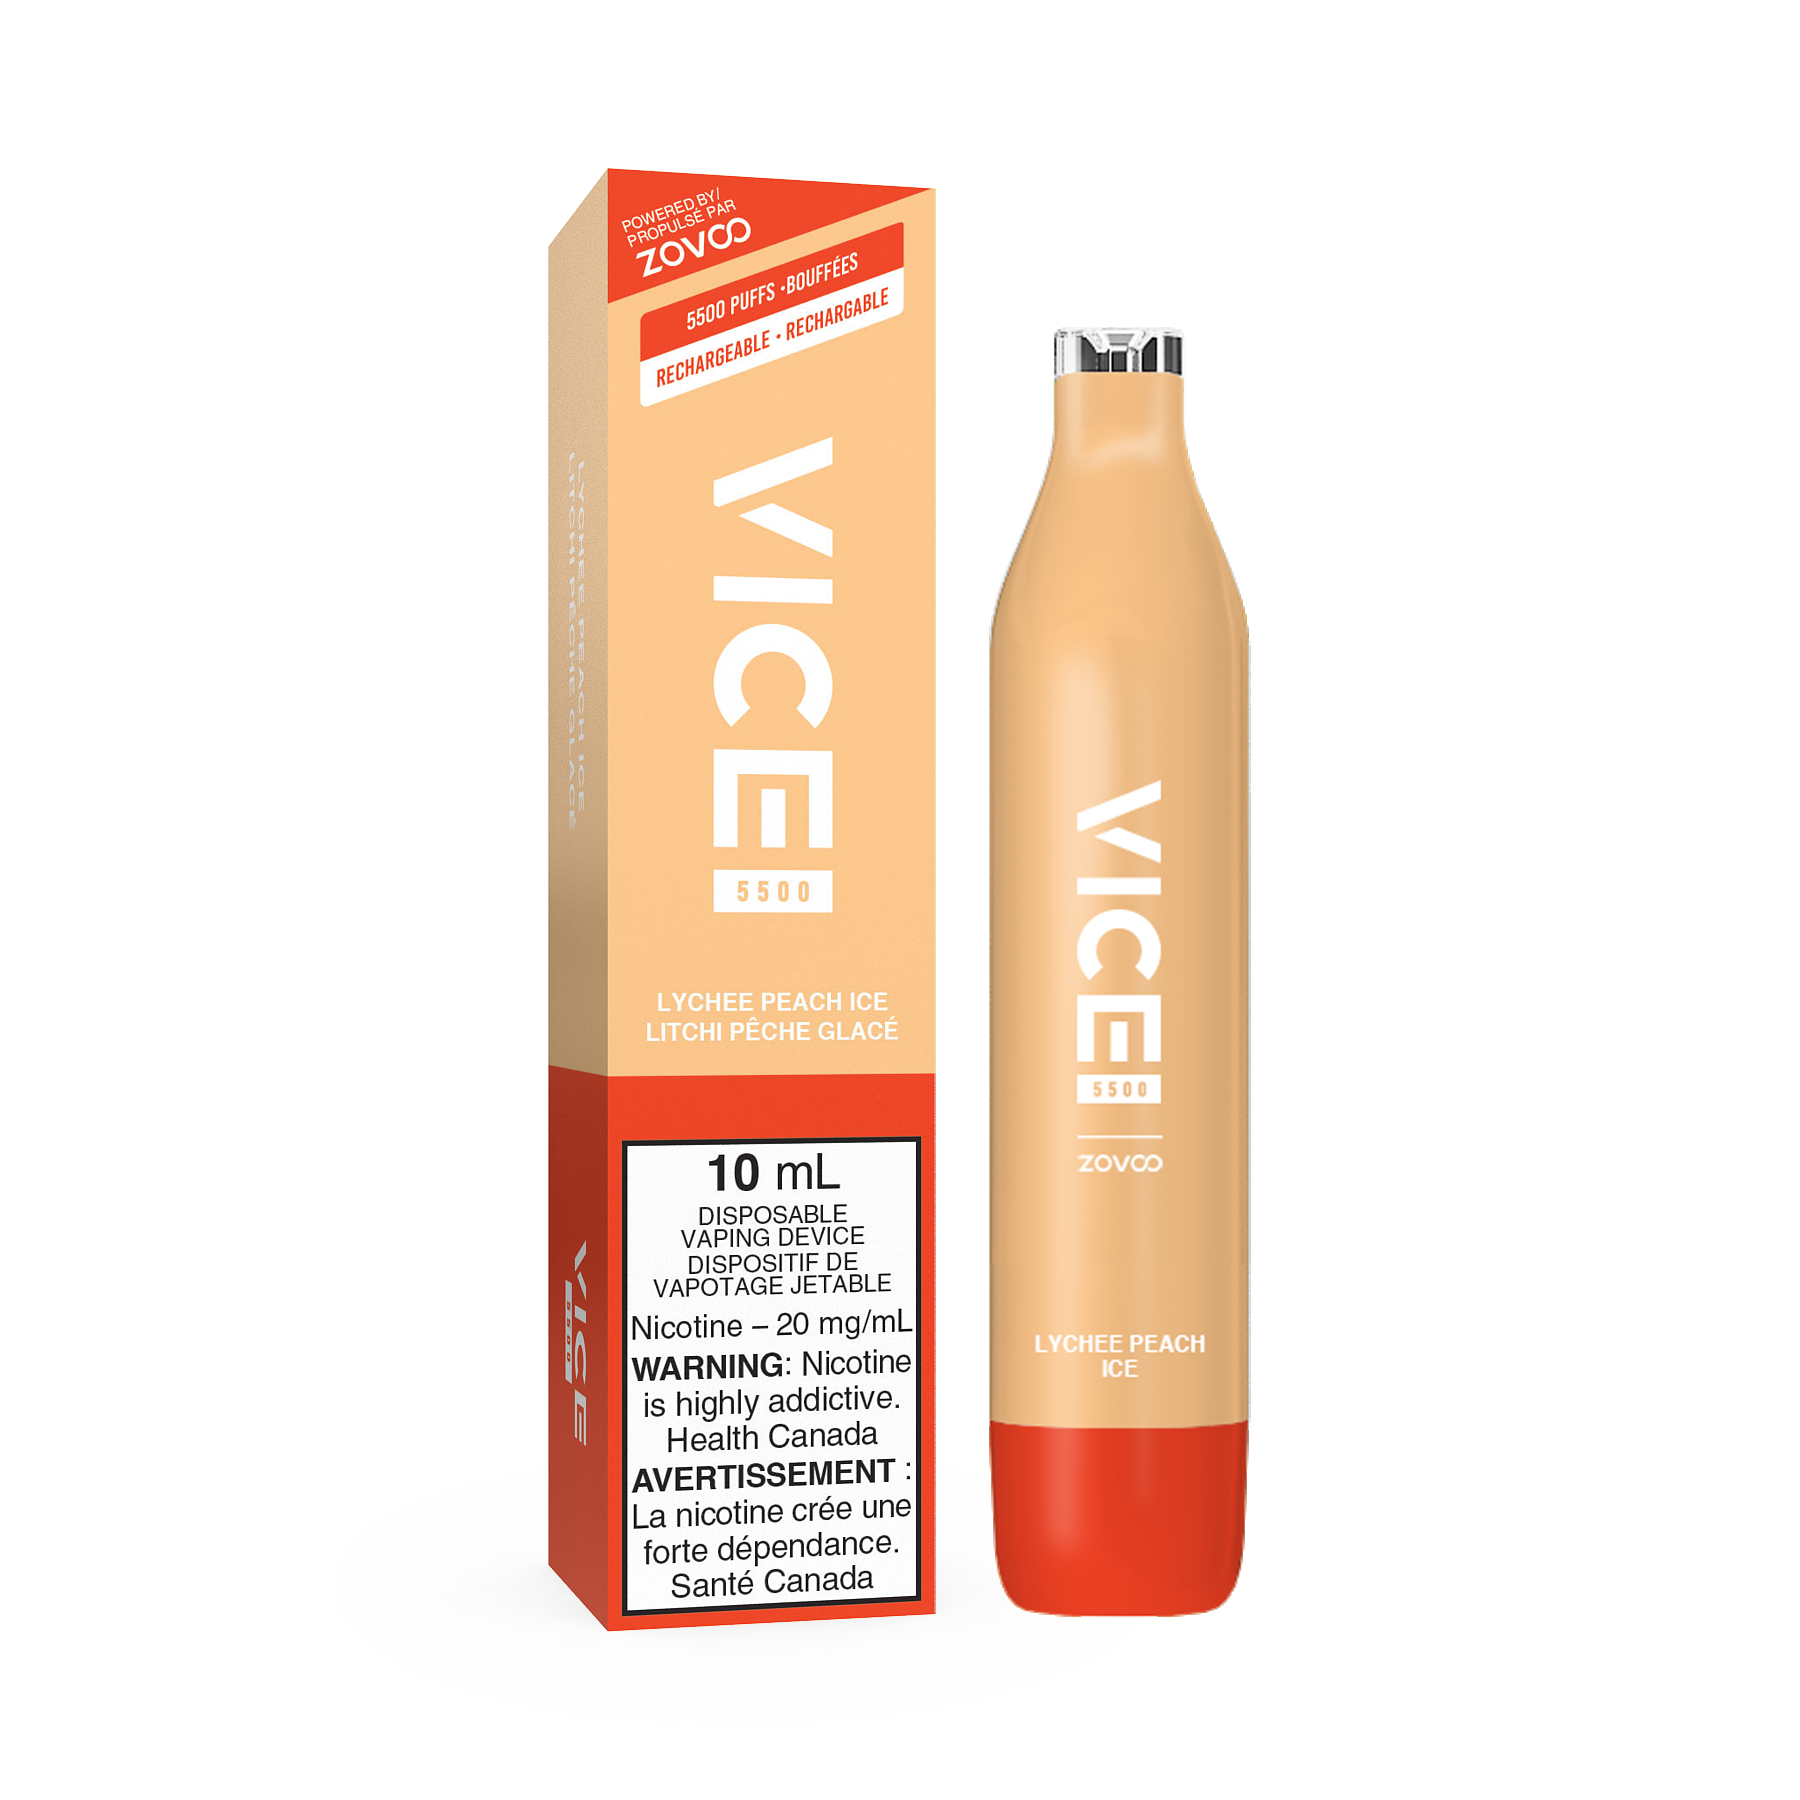 VICE 5500 DISPOSABLE - LYCHEE PEACH ICE